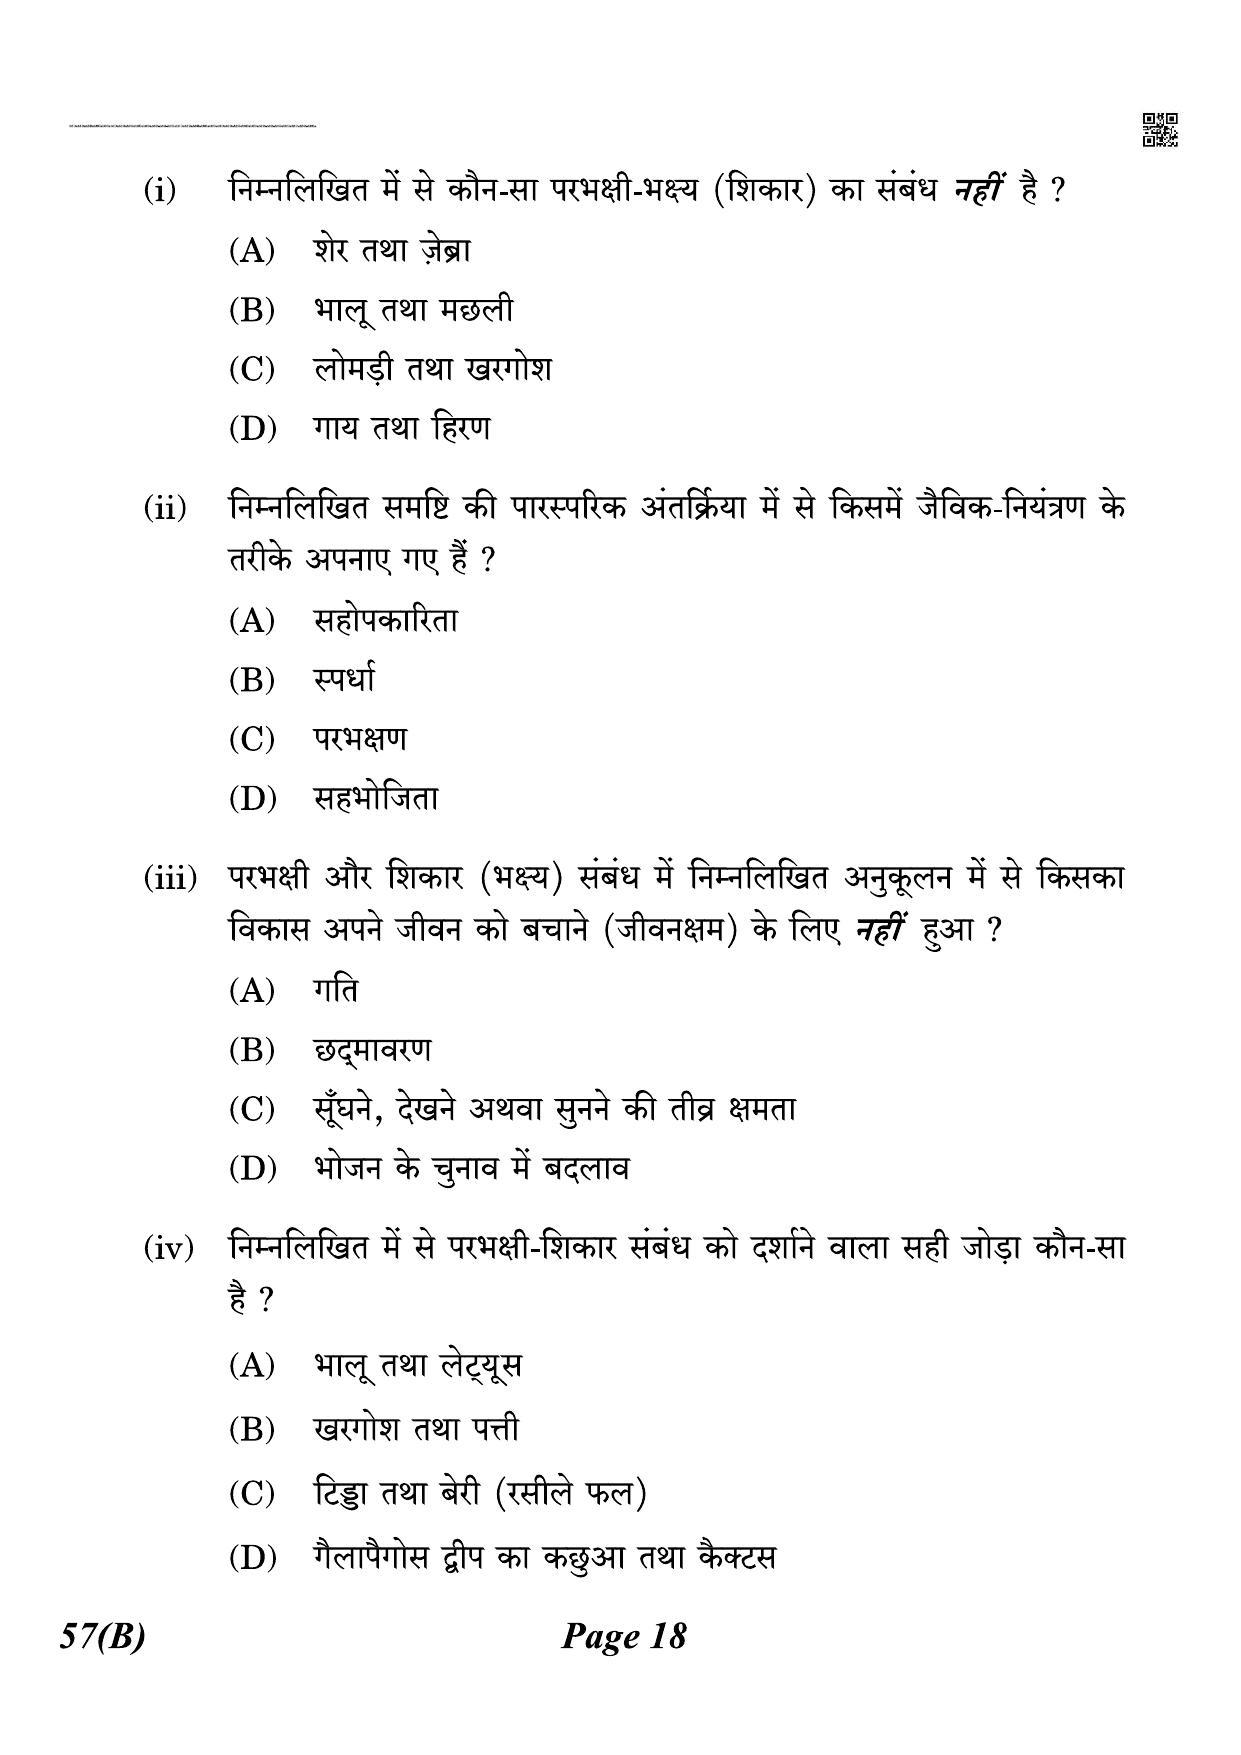 CBSE Class 12 QP_044_biology_for_visually_impared_candidates 2021 Compartment Question Paper - Page 18